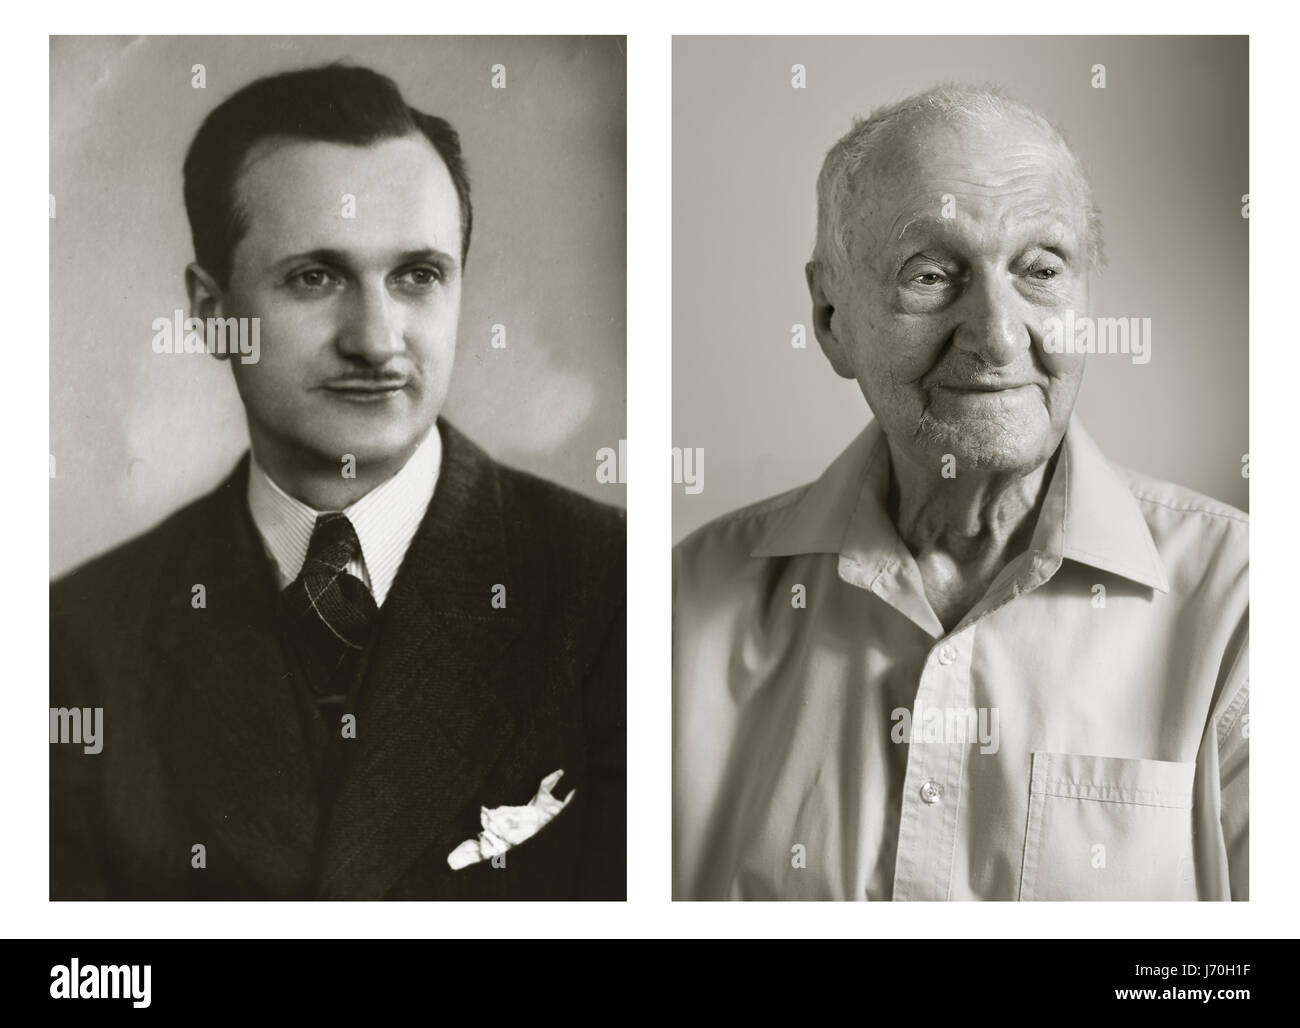 Antonín Kovář. Left: 25 years old, right: 102 years old. He was a musician, film maker and driver and now lives in retirement home in Usti nad Labem. He wishes to play the clarinet once again. POIGNANT portraits have posed centenarians alongside their younger selves in a project called Faces of Century. The incredible images tell the unique stories of each person’s life including one woman who was in the truck that hit and killed high-ranking German Nazi official Reinhard Heydrich’s son Klaus in 1943. Another intriguing tale comes from a 101-year-old woman who decided to leave her luxury villa Stock Photo